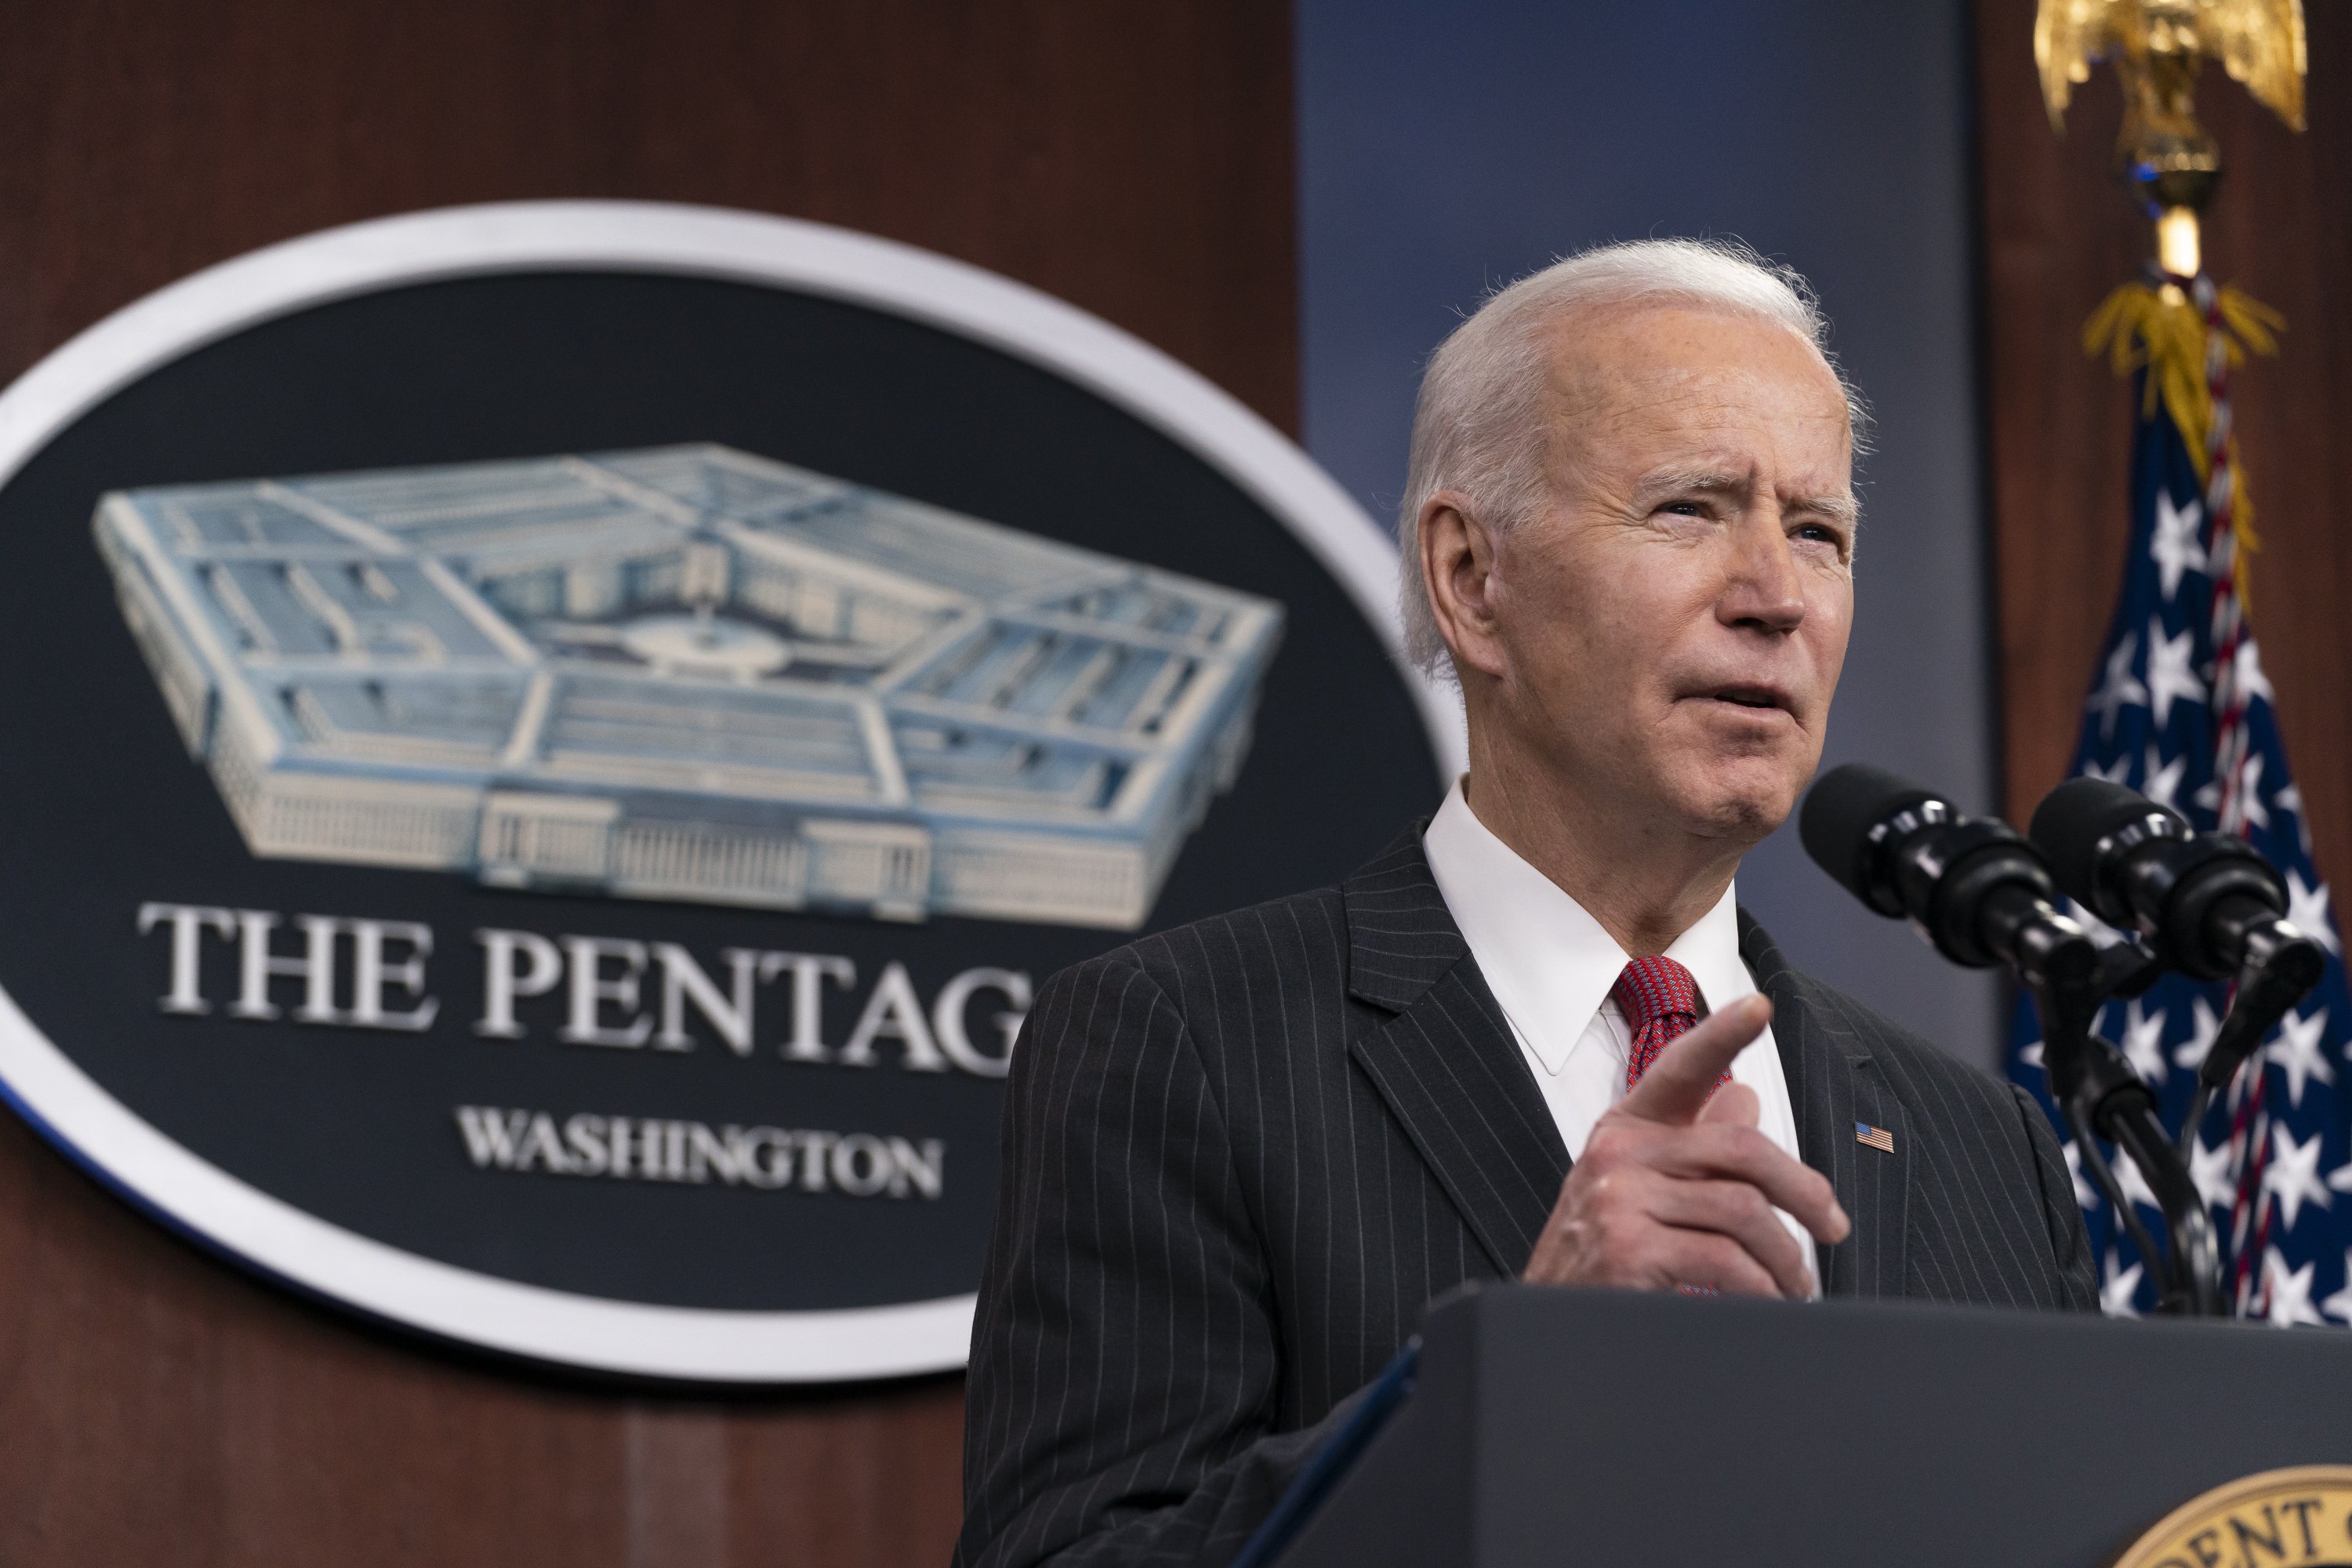 Biden in touch with China’s Xi raises human rights, trade